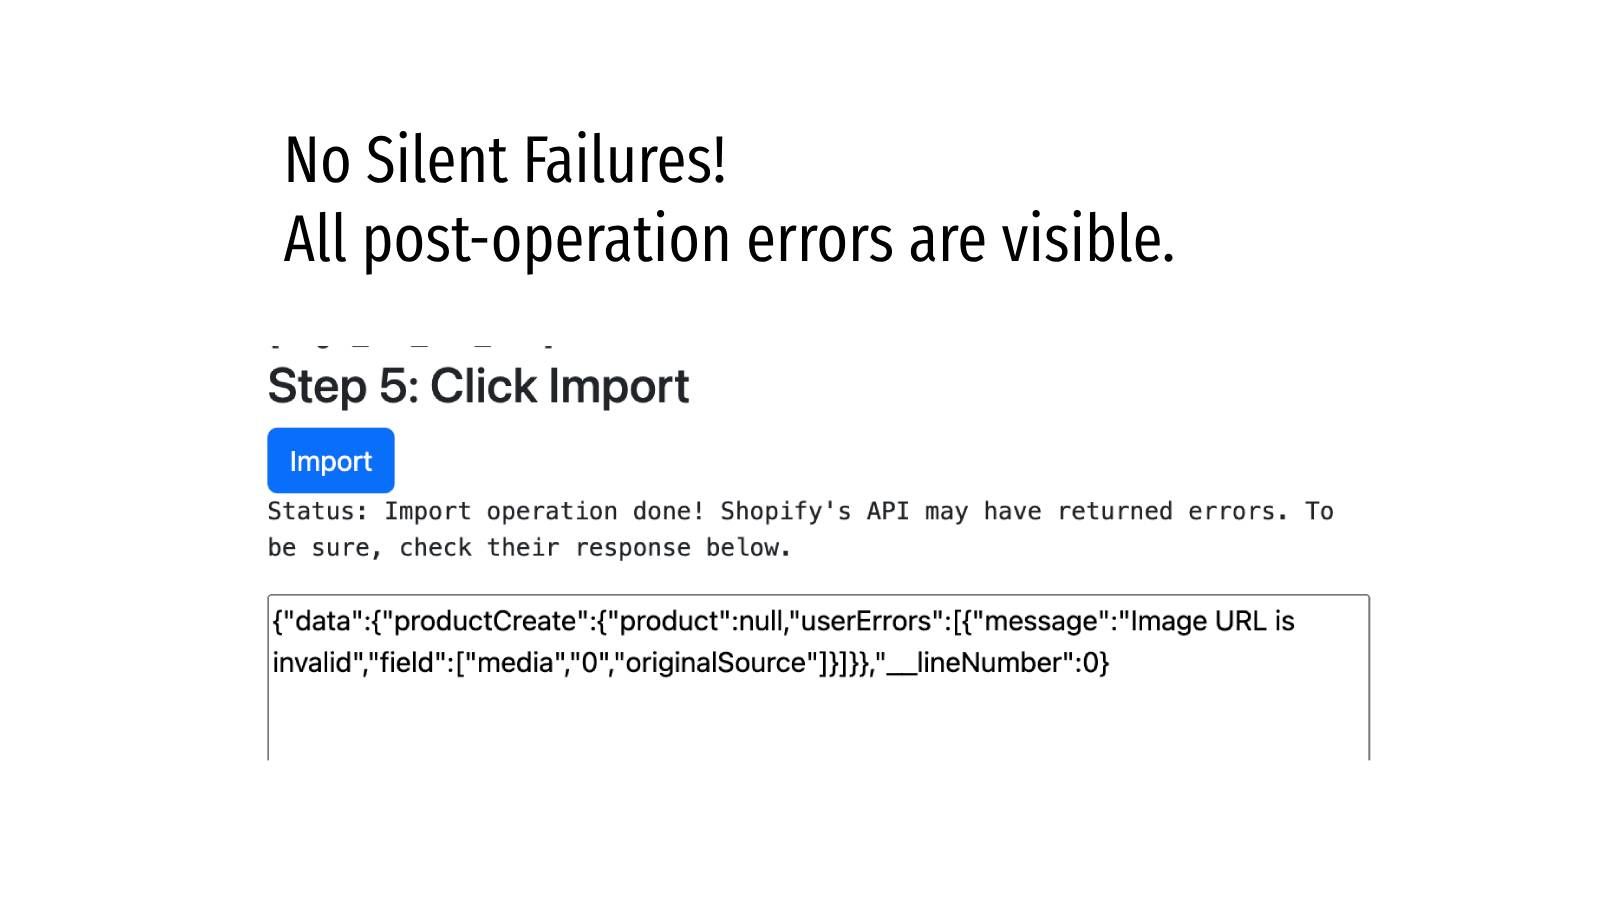 No Silent Failures. All post-operation errors are visible.